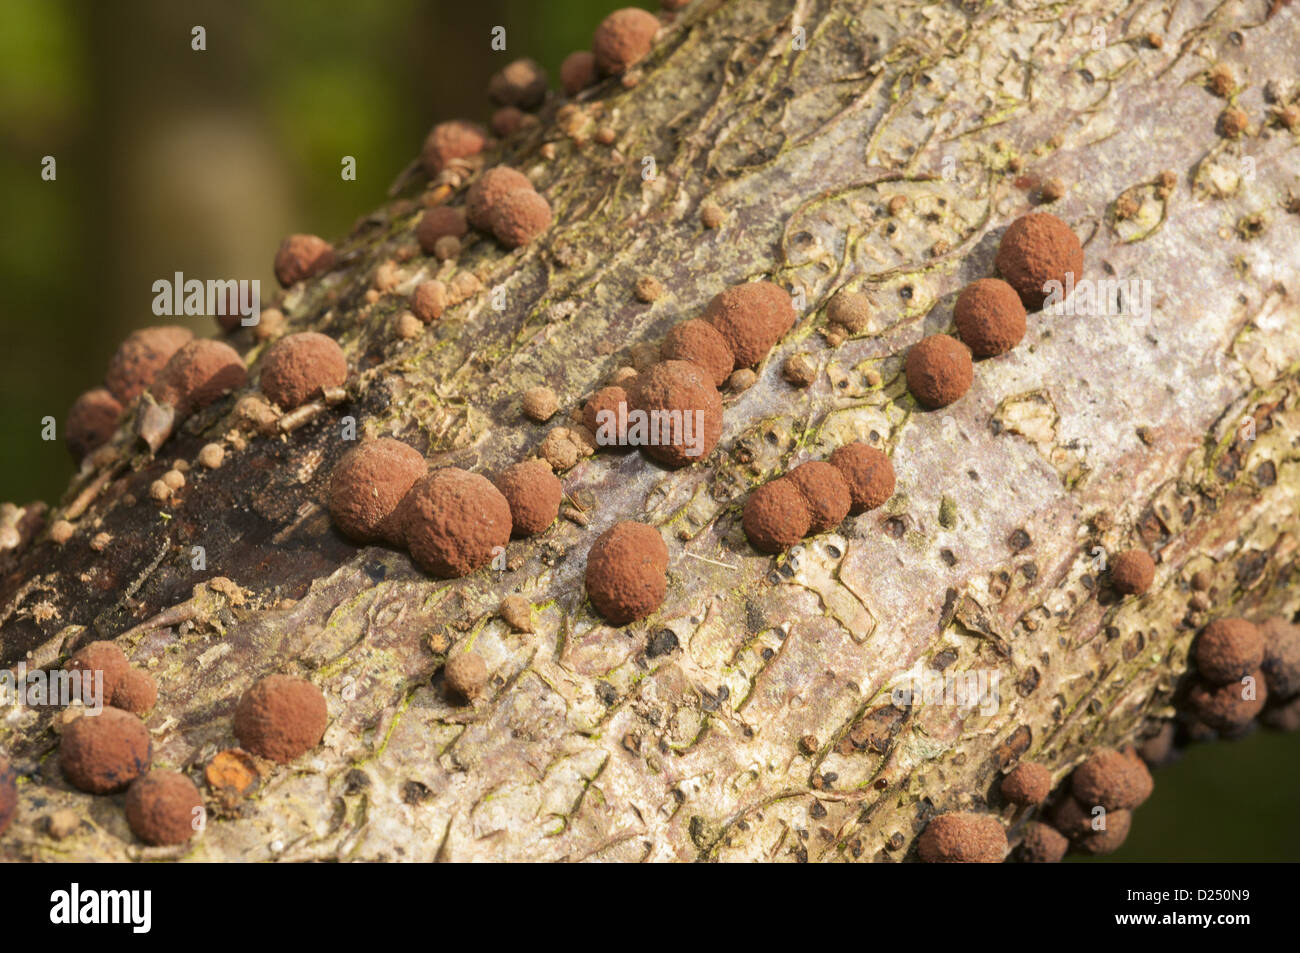 Coral Spot Fungus (Nectria cinnabarina) fruiting bodies, growing on branch, Chipping, Lancashire, England, October Stock Photo